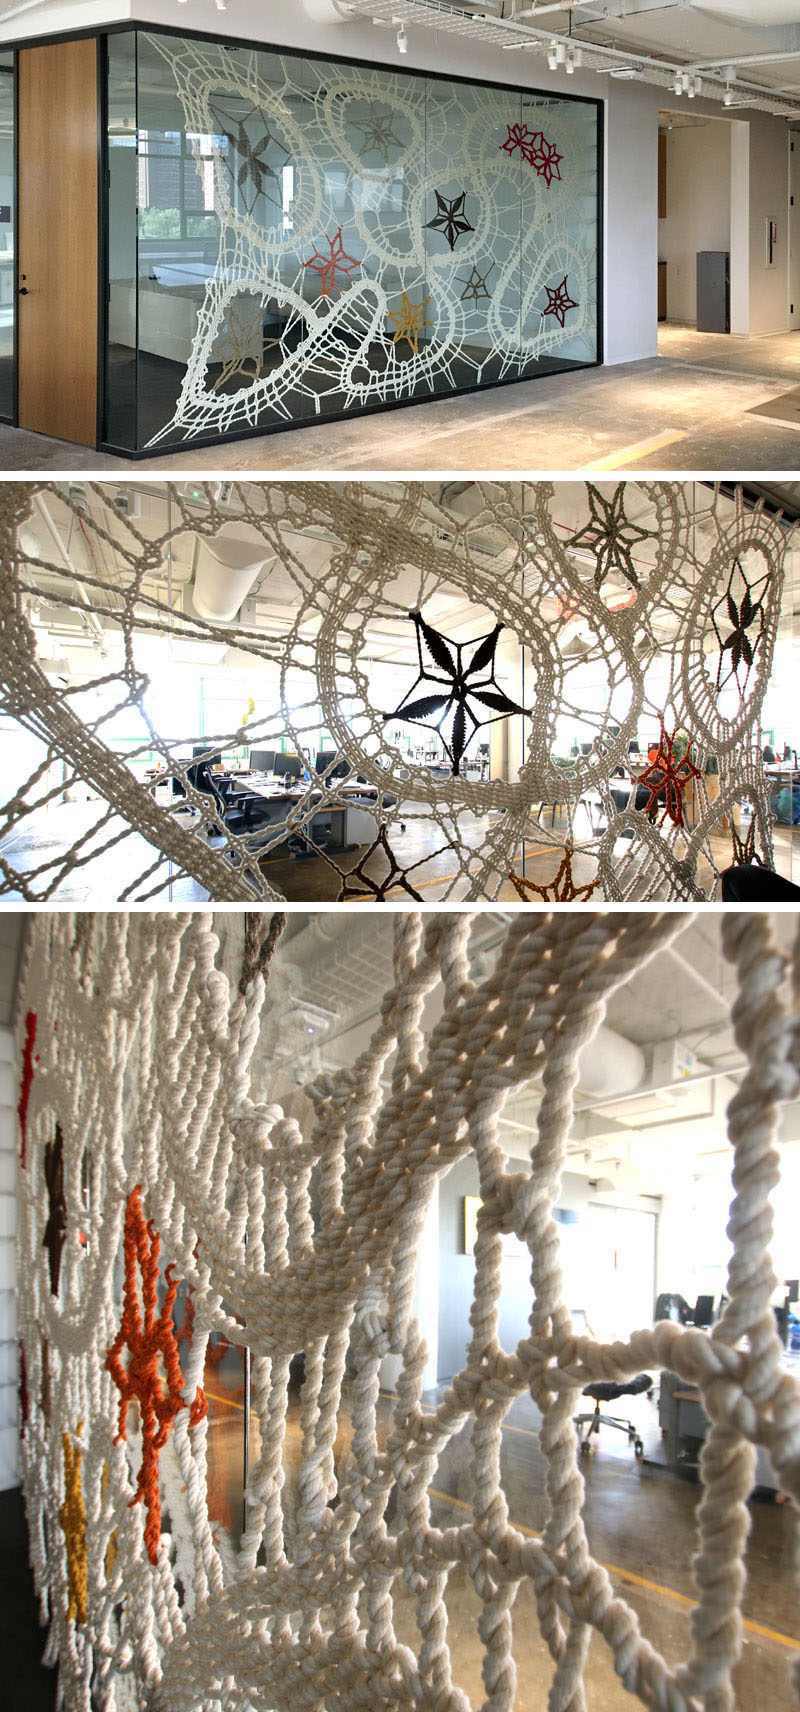 Artist Manca Ahlin of Mantzalin, was commissioned by Etsy to create a collection of handmade rope installations for their new head office in Dumbo, New York.